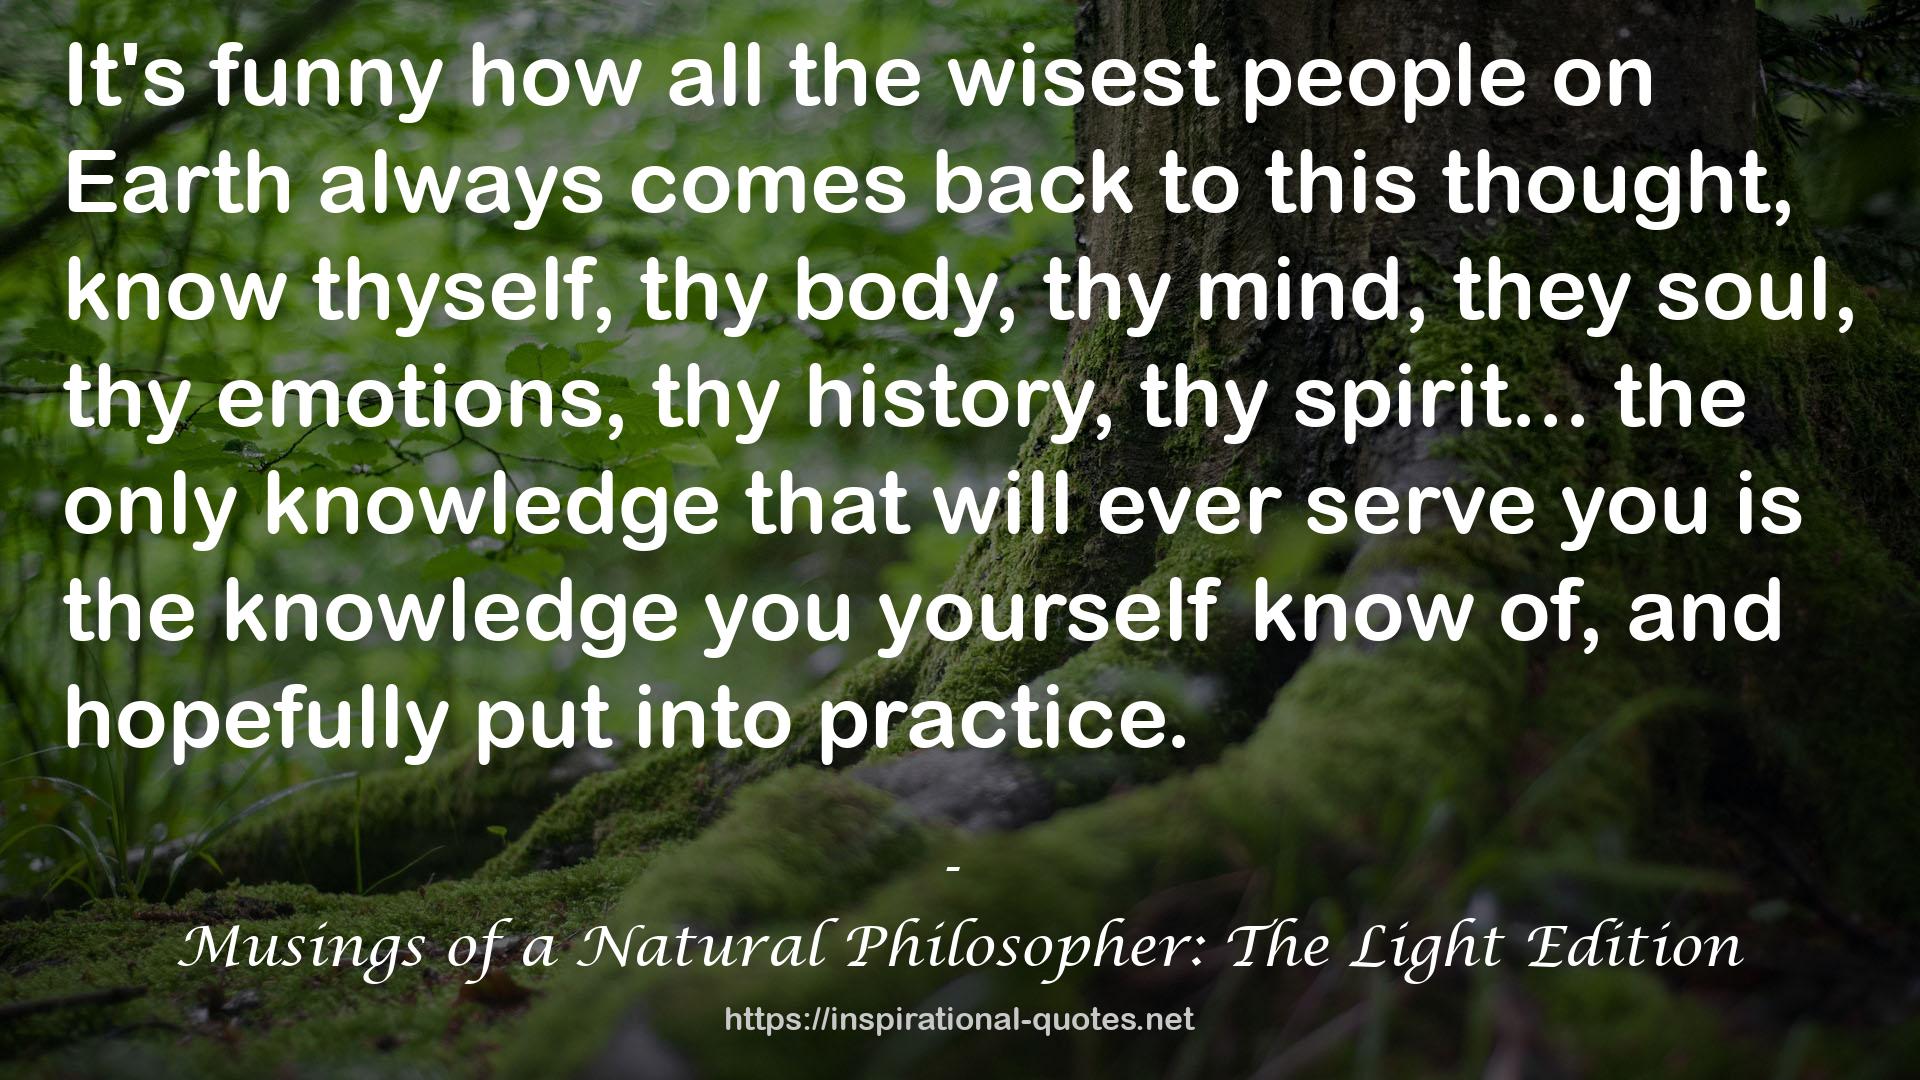 Musings of a Natural Philosopher: The Light Edition QUOTES